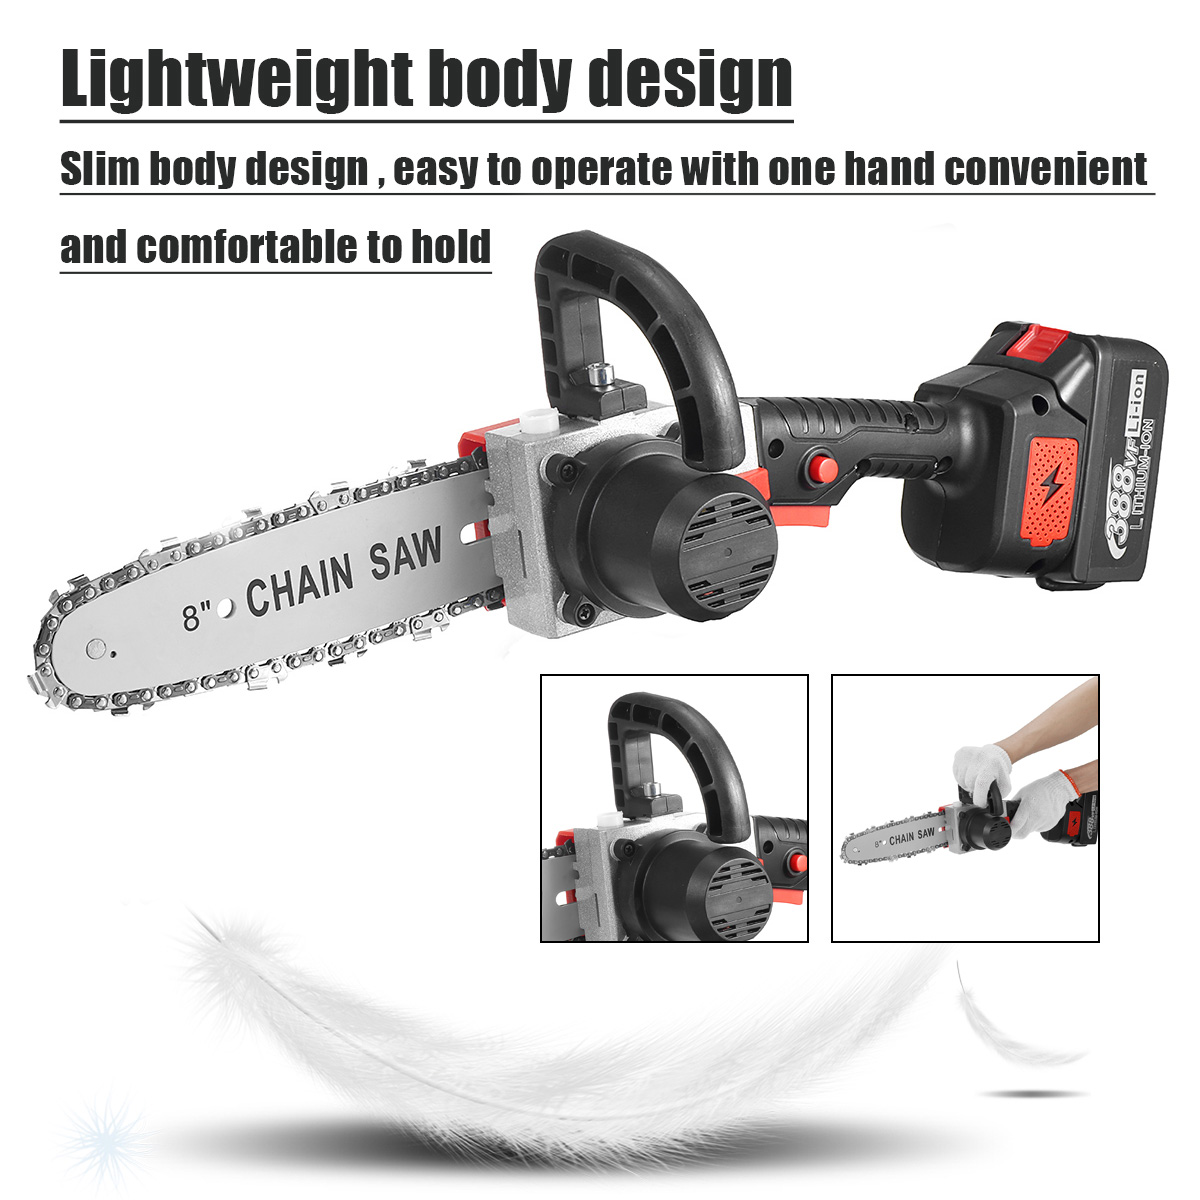 88VF-8-Inch-Cordless-Electric-Chainsaw-Wood-Cutter-Saw-Rechargeable-Woodworking-Tool-W-None12-Batter-1868739-7